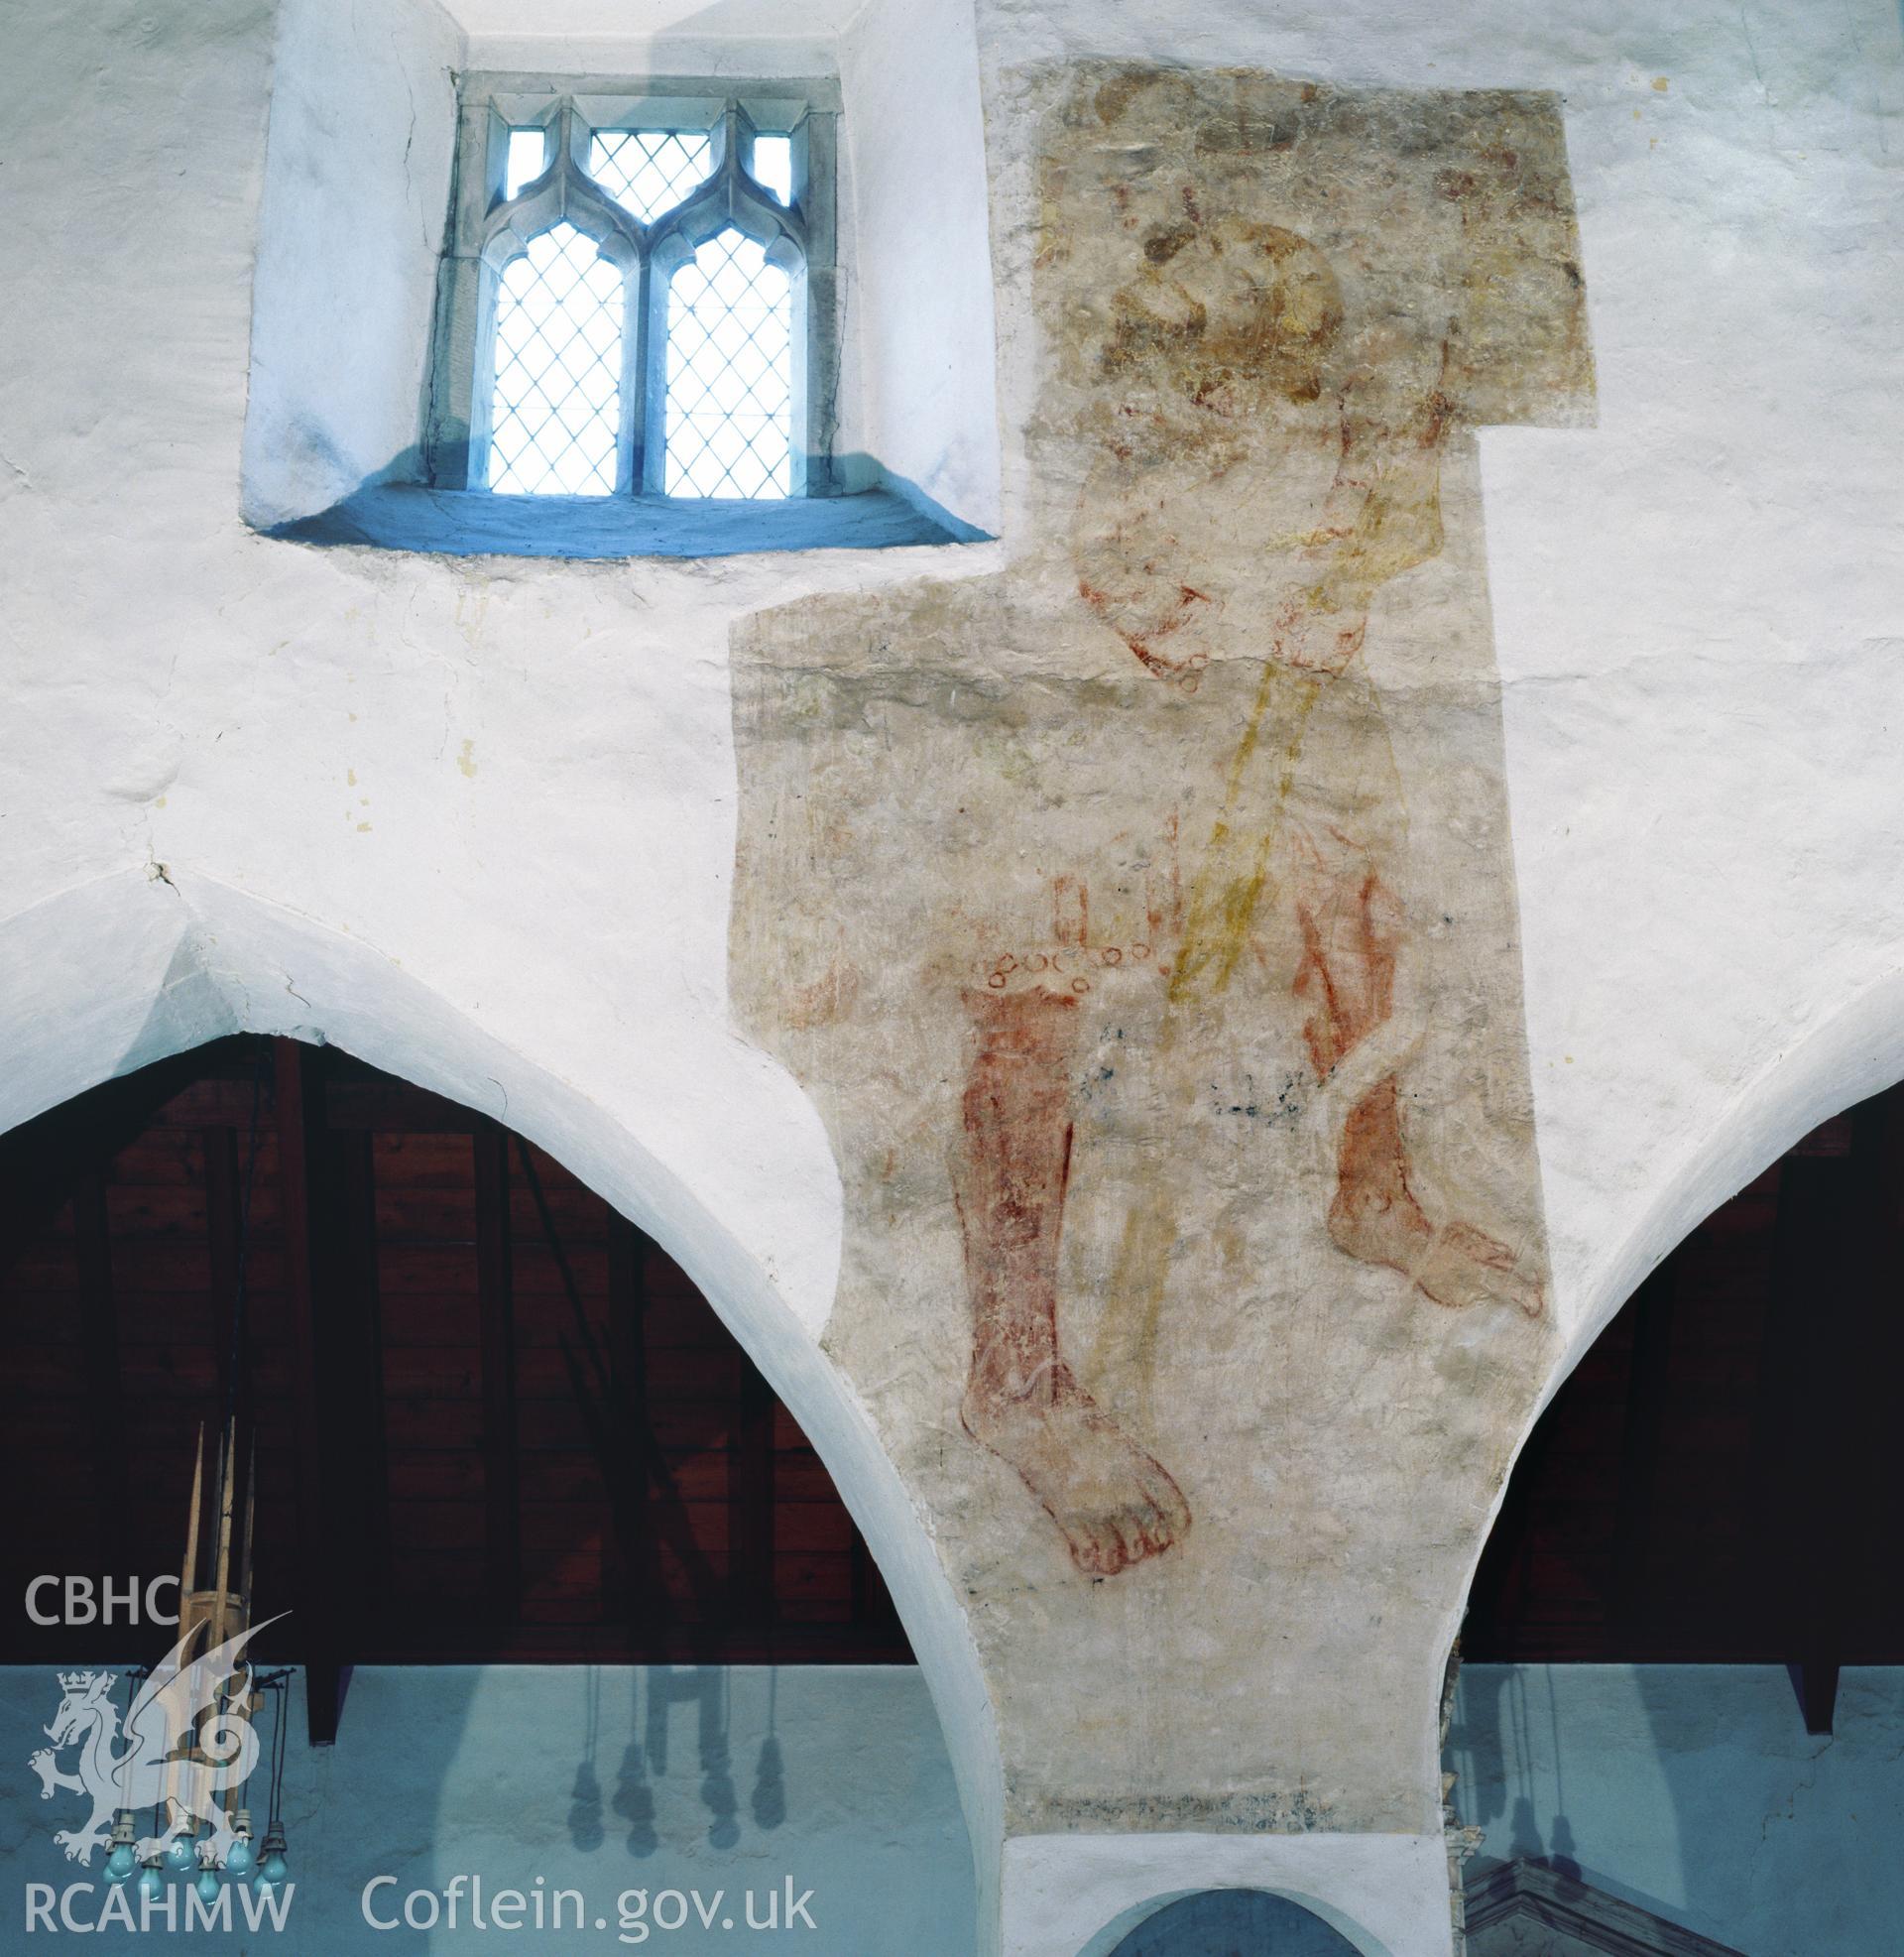 RCAHMW colour transparency showing wallpainting at St Illtyds Church, Llantwit Major, taken by Iain Wright, 2003